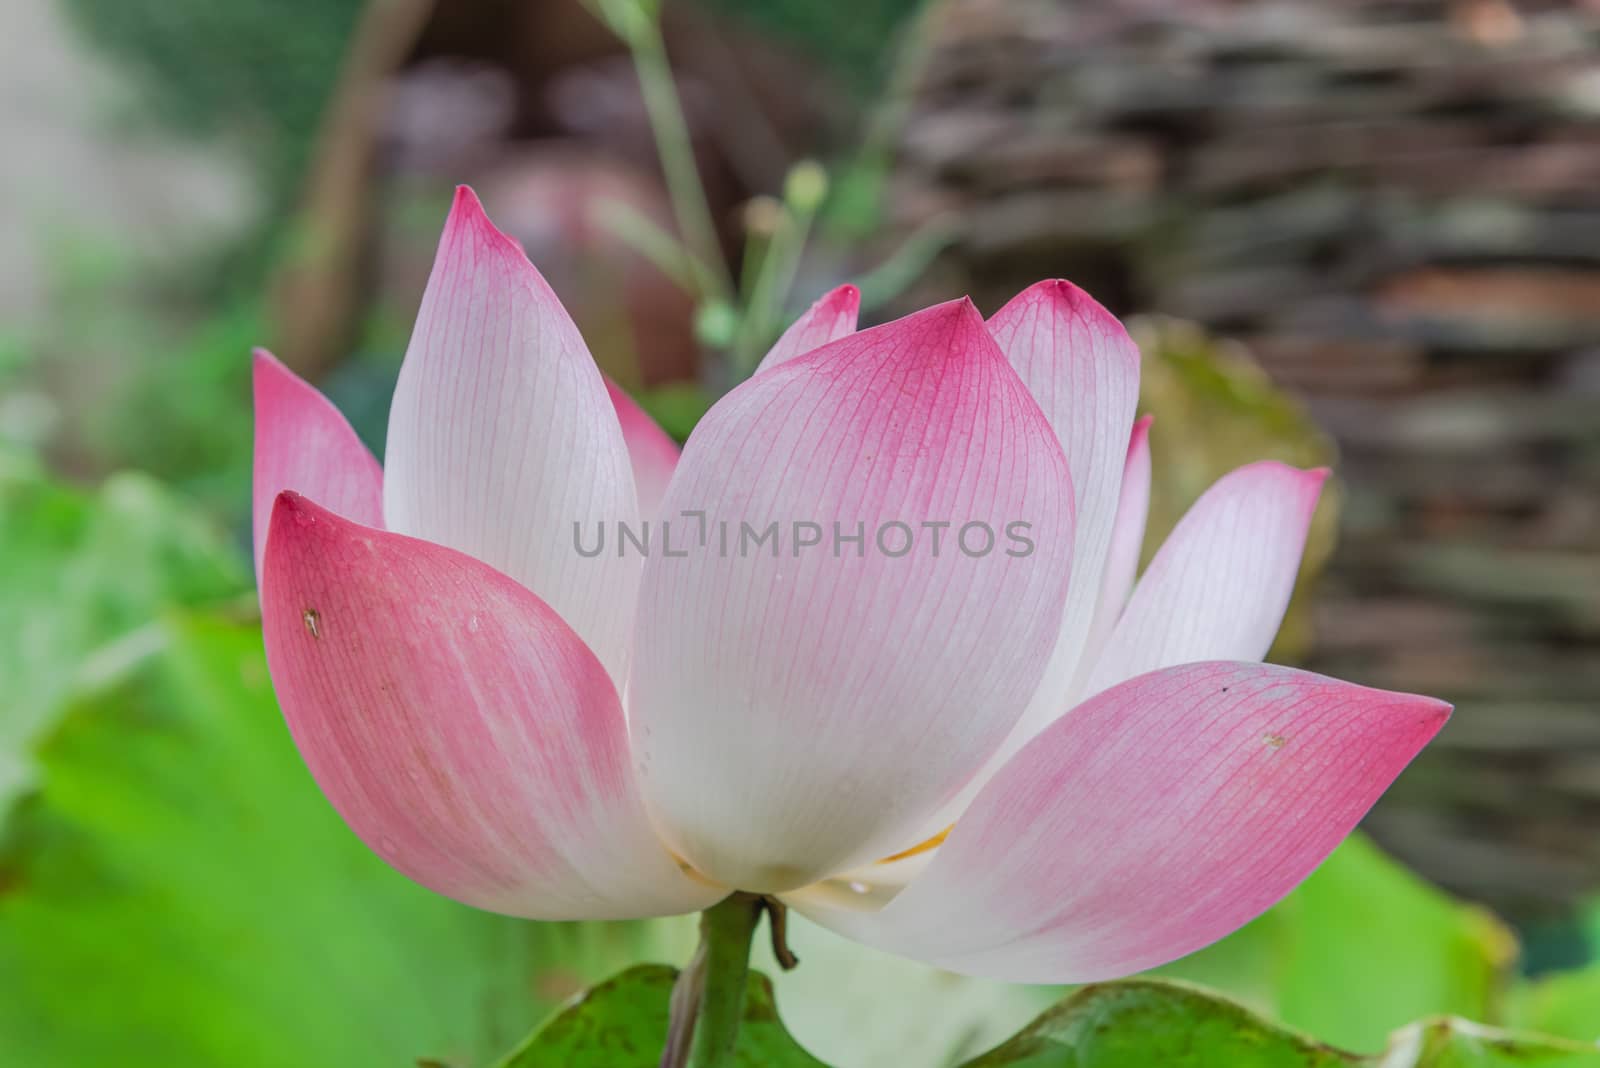 Single blossom pink lotus flower with ceramic pot fountain jar in background. Lotus is national flower of India and Vietnam